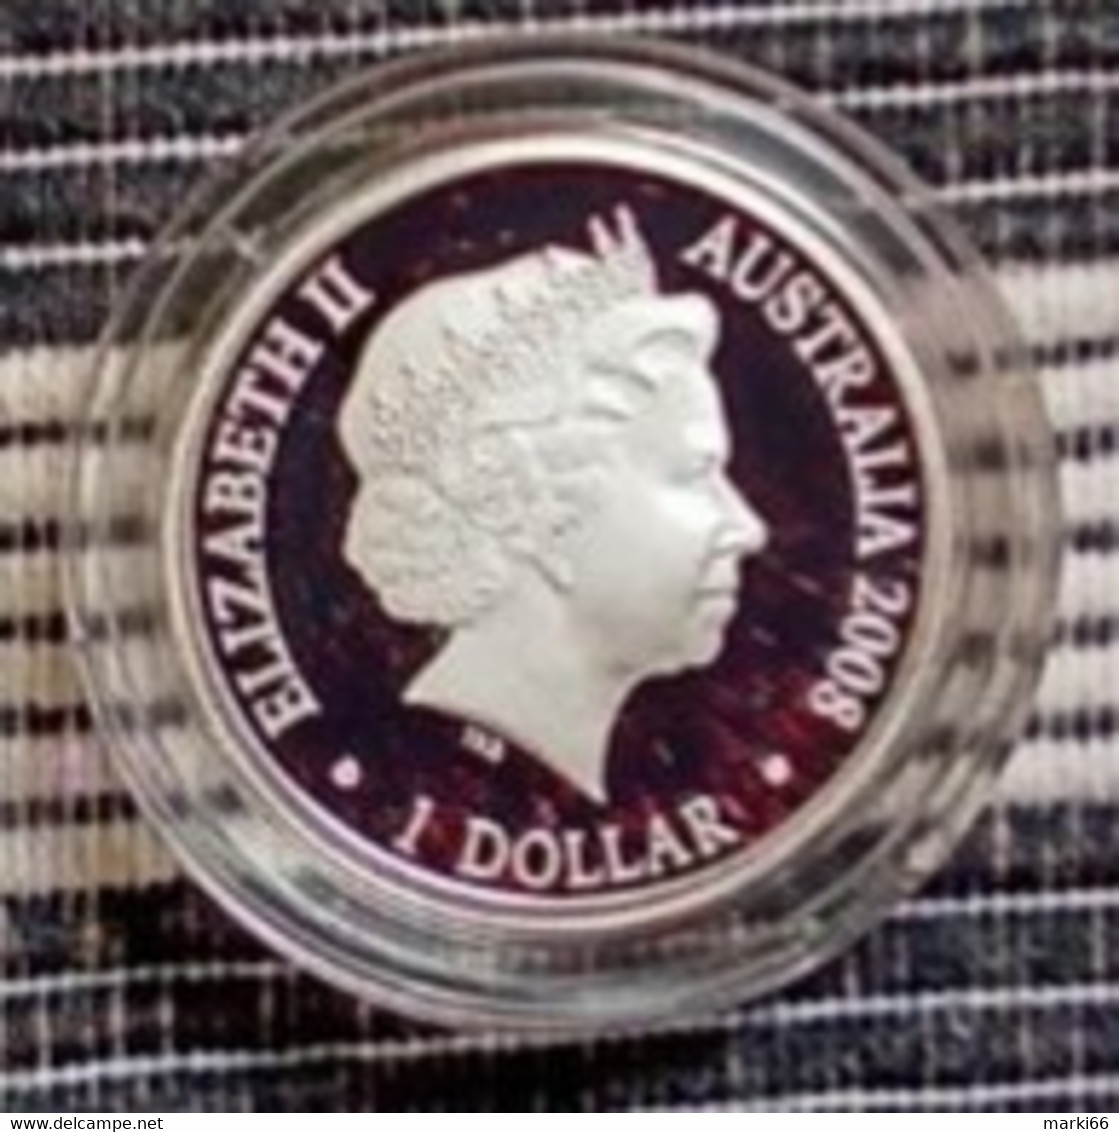 Australia - 2008 - Lunar Series - Year Of The Rat - 1 Dollar Fine Silver Proof Coin - Mint Sets & Proof Sets